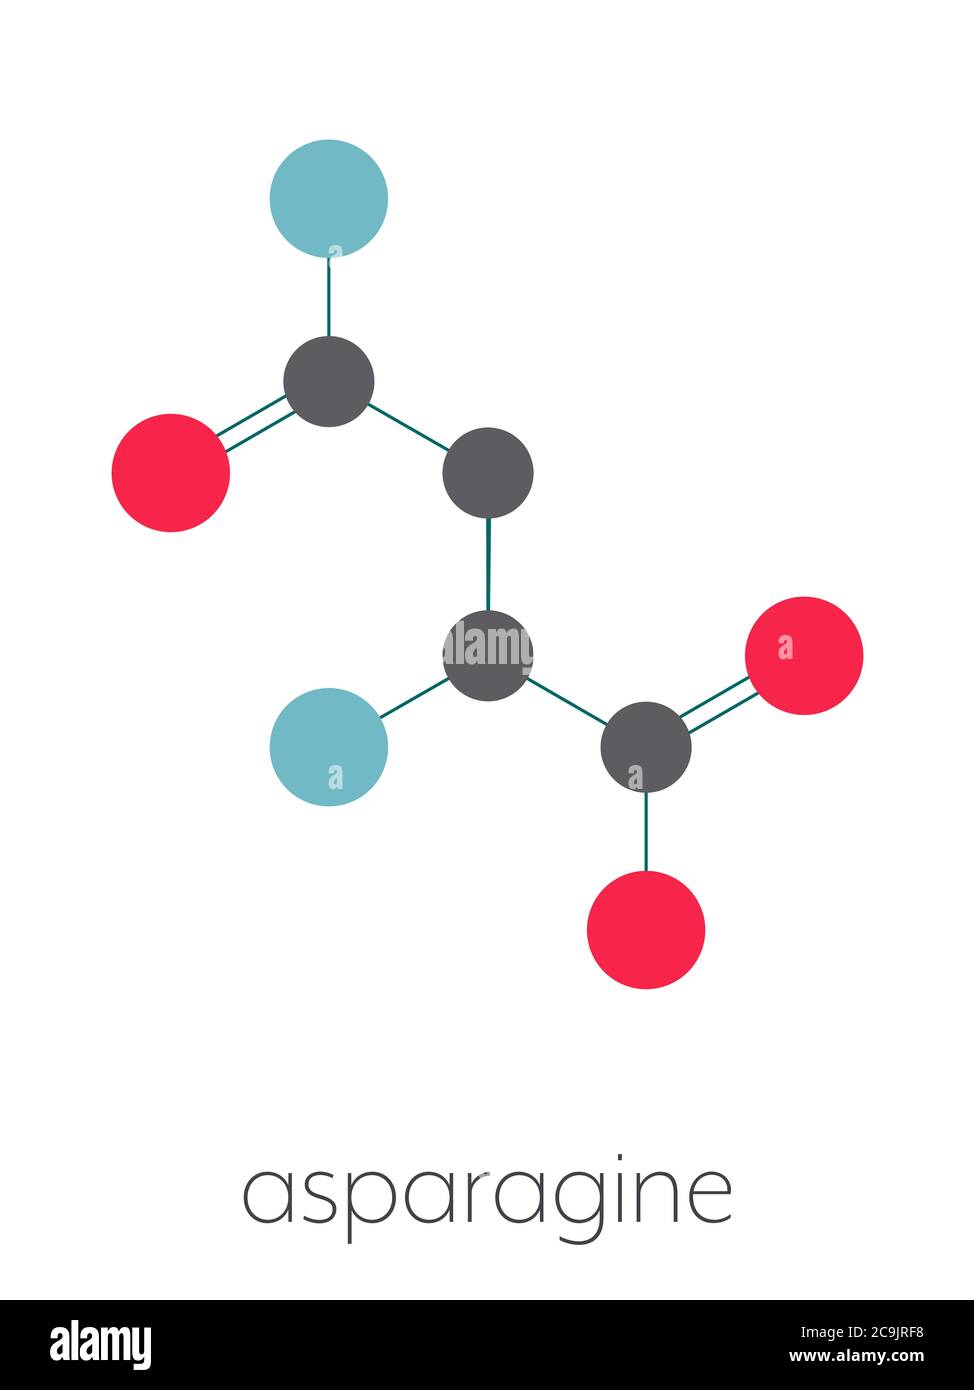 Asparagine (L-asparagine, Asn, N) amino acid molecule. Stylized skeletal formula (chemical structure). Atoms are shown as color-coded circles connecte Stock Photo